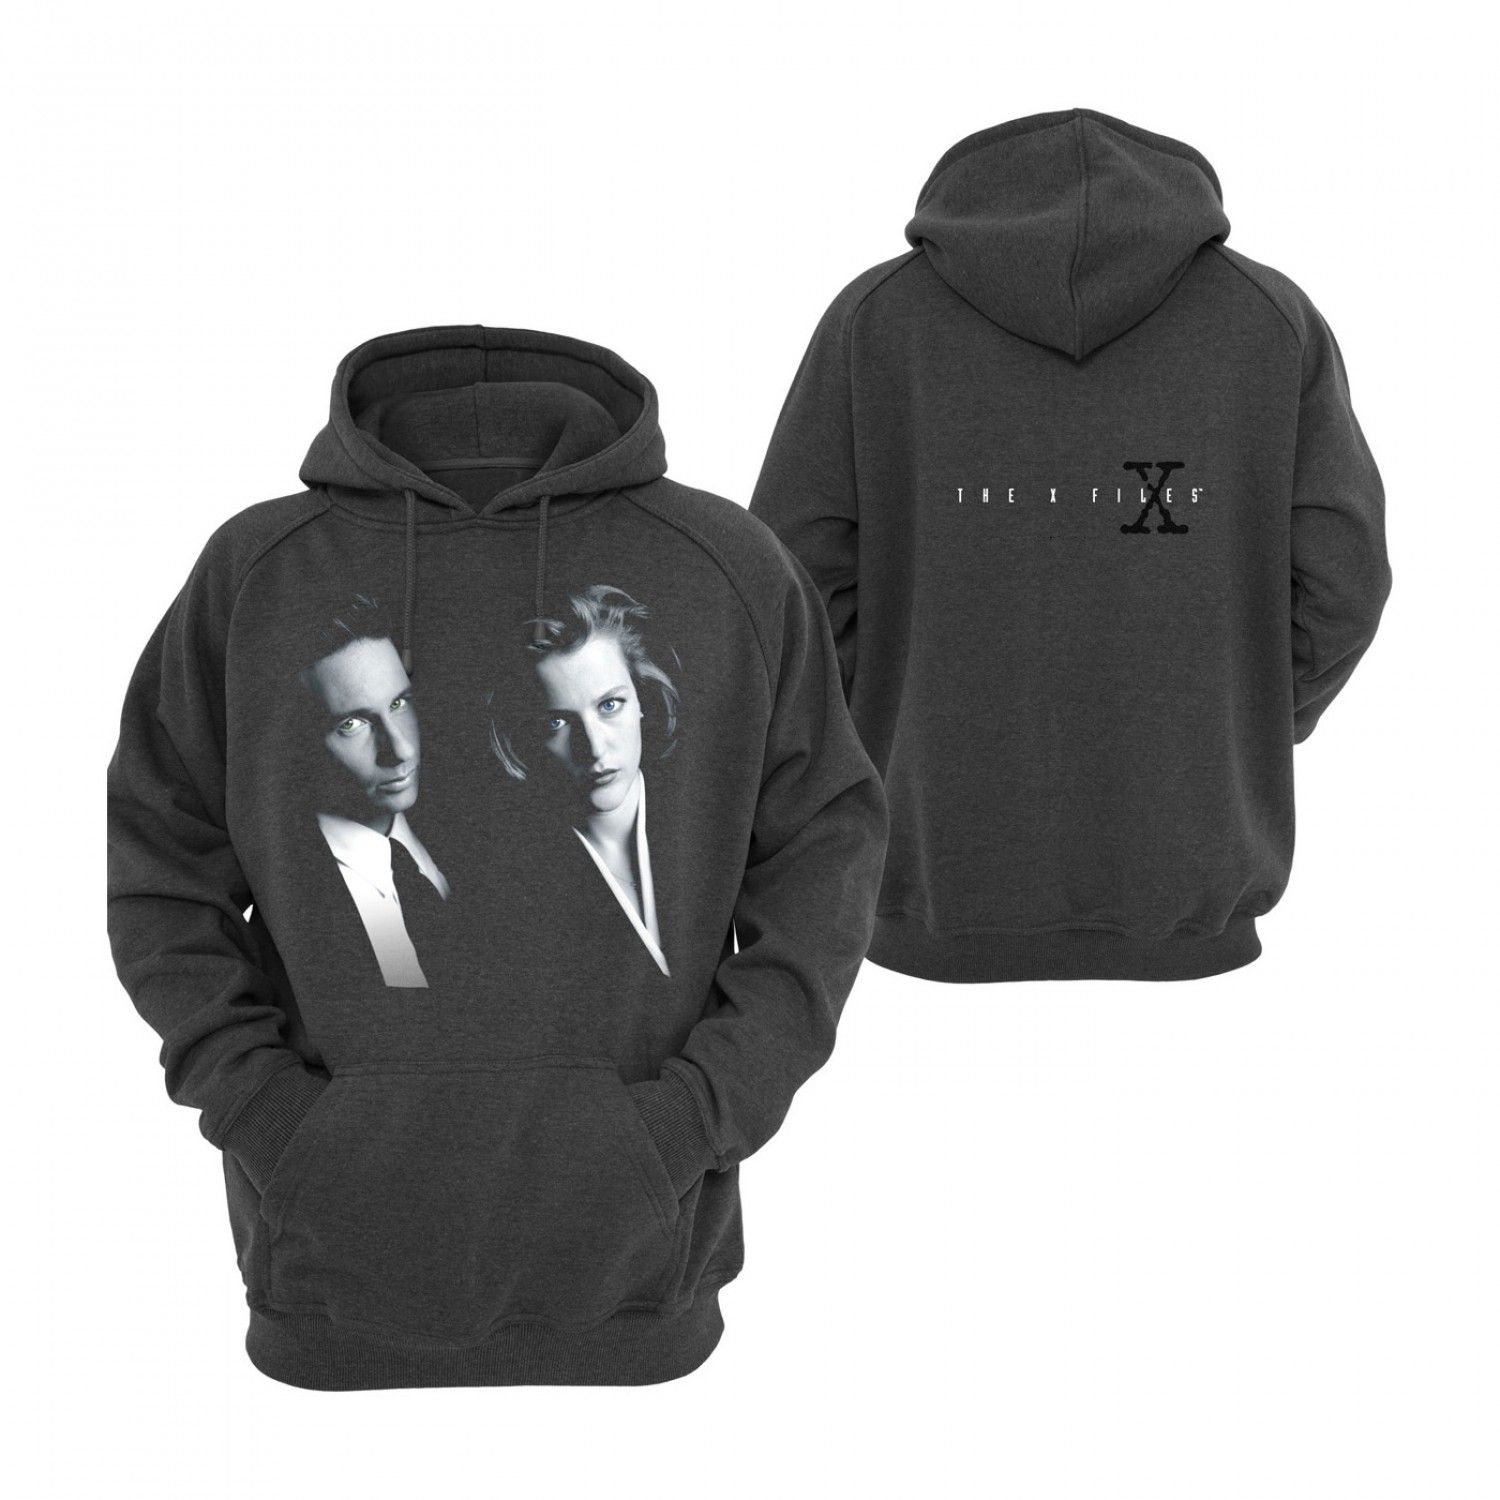 the-x-files-mulder-and-scully-hoodie-384_1500